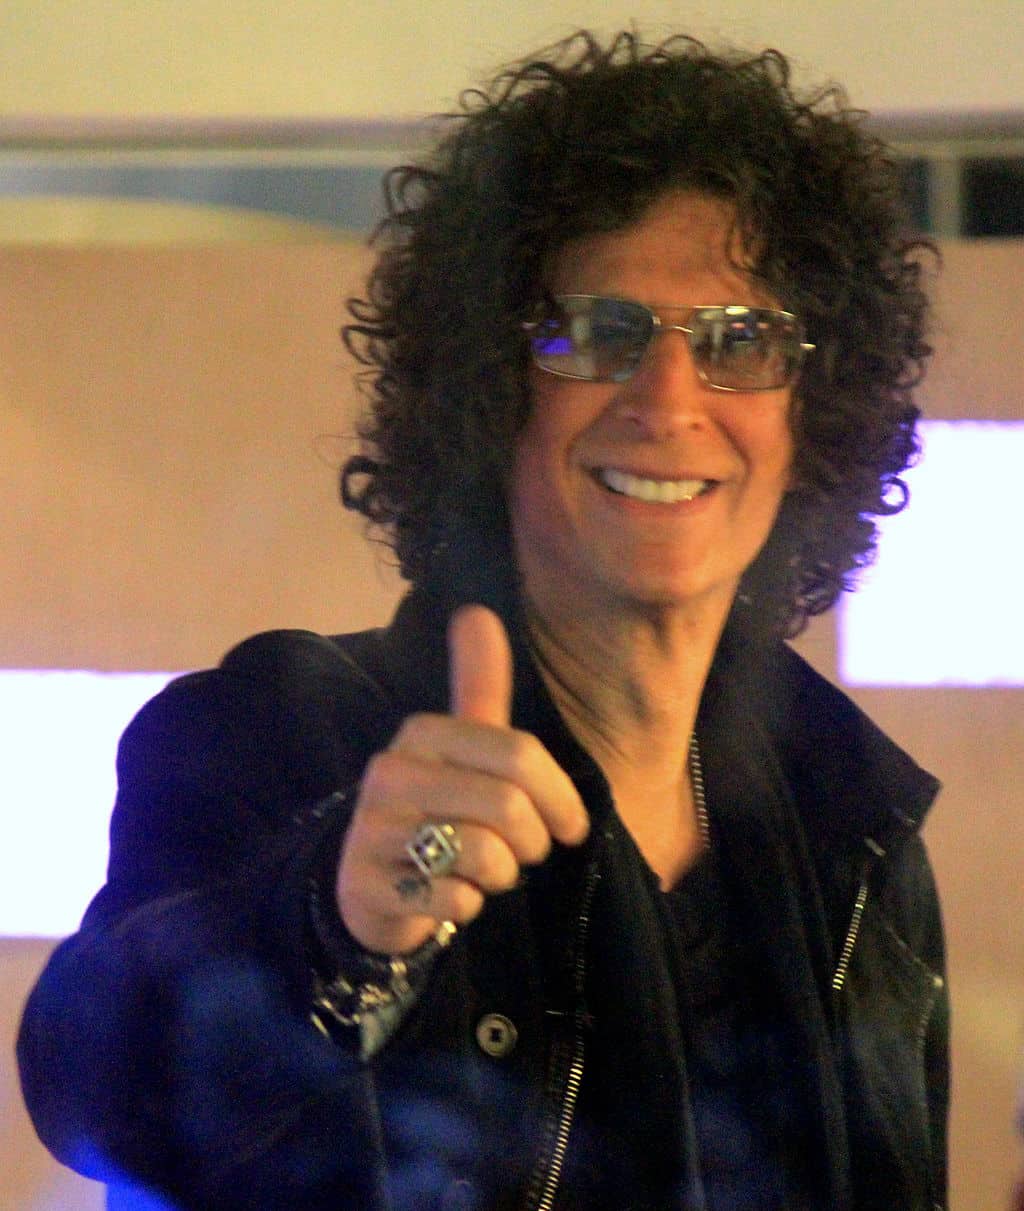 Howard Stern Begins Broadcasting From Florida For The First Time Ever